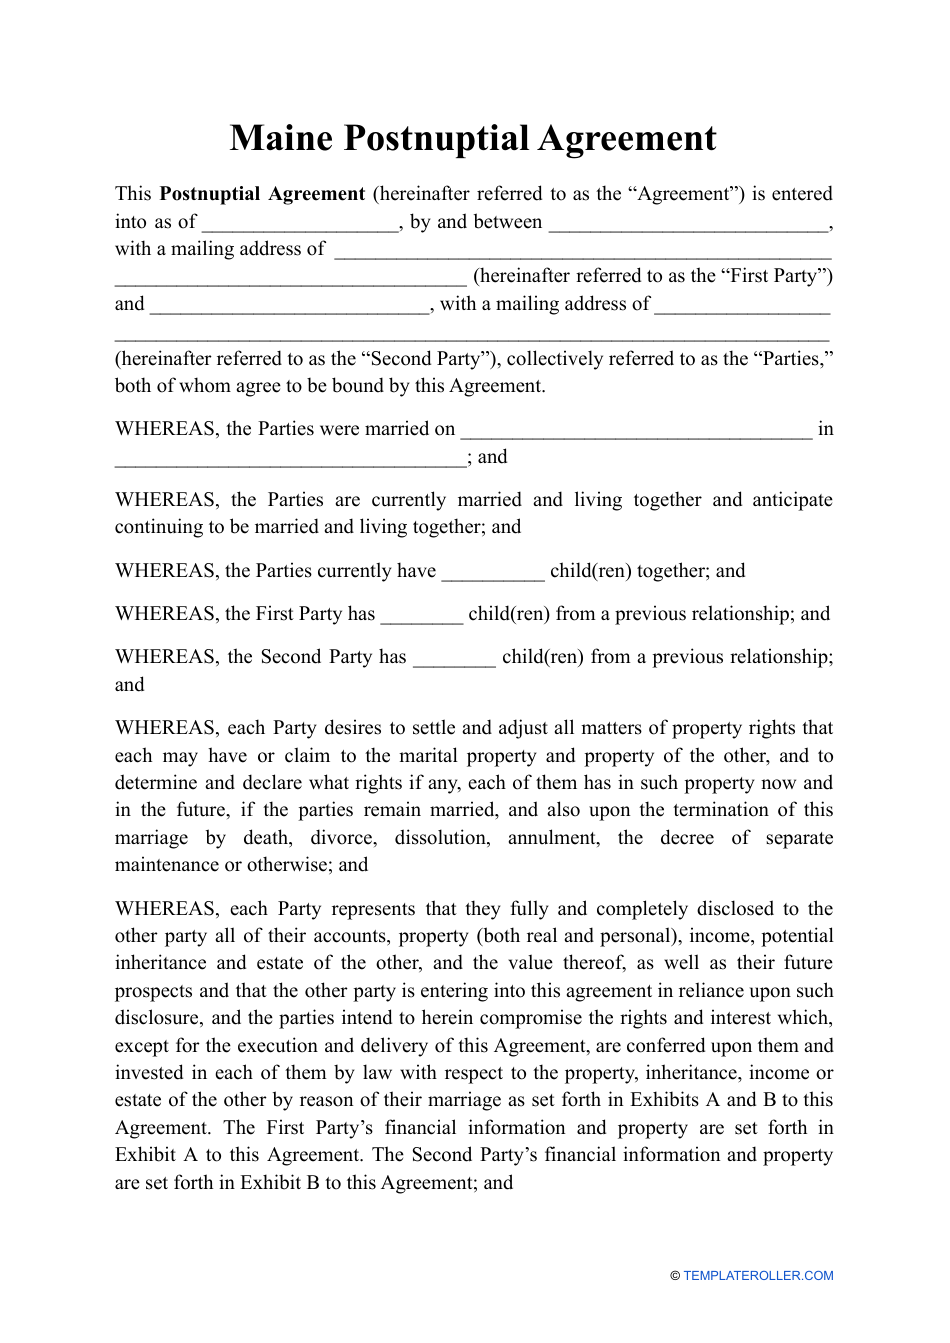 Postnuptial Agreement Template - Maine, Page 1